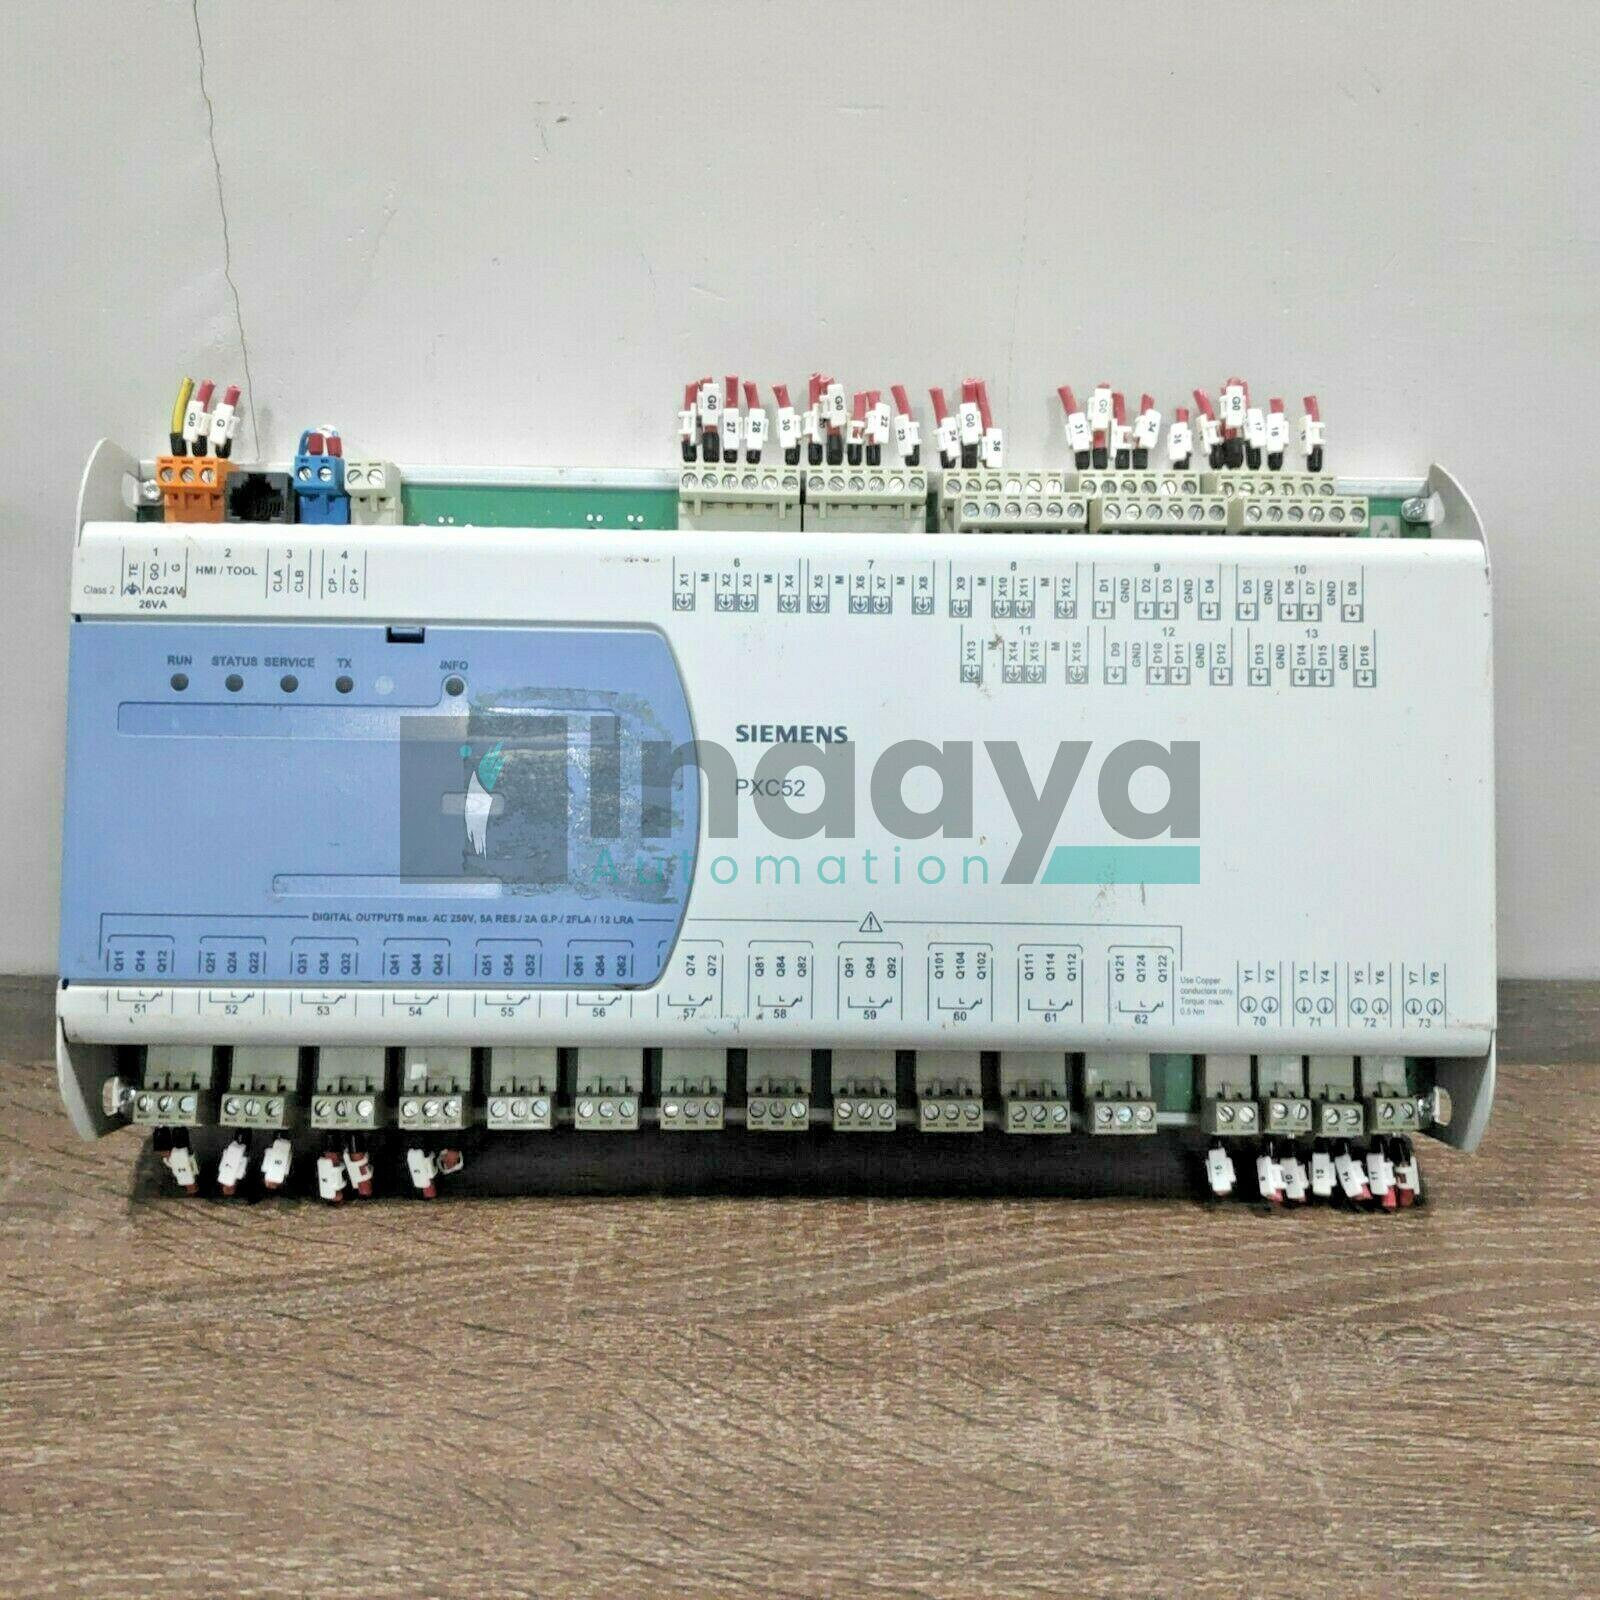 SIEMENS PXC52 BUILDING AUTOMATION STATION